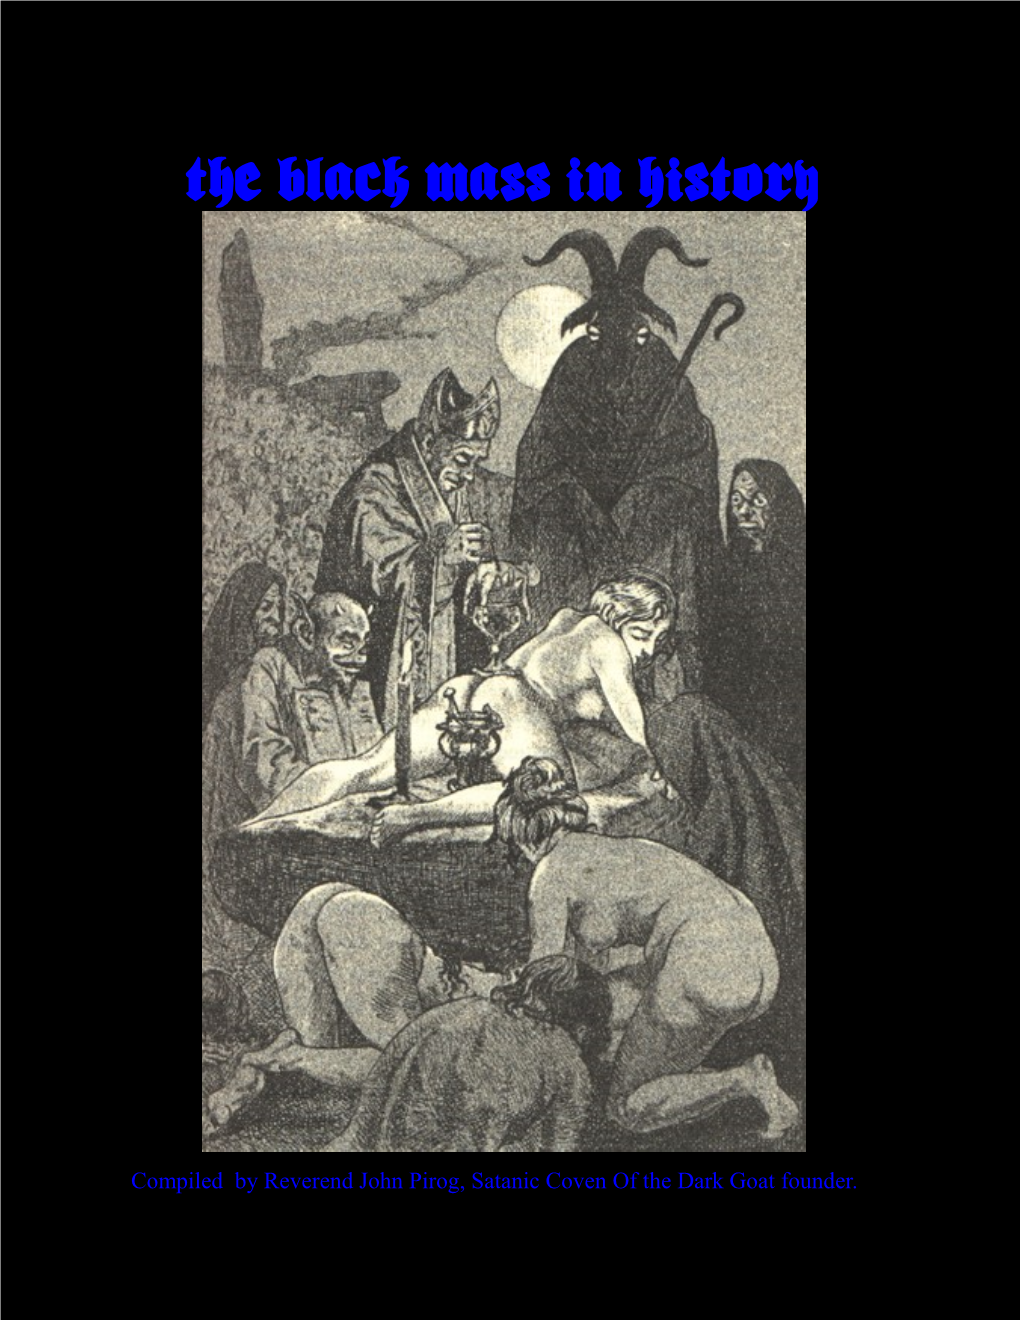 The Black Mass in History